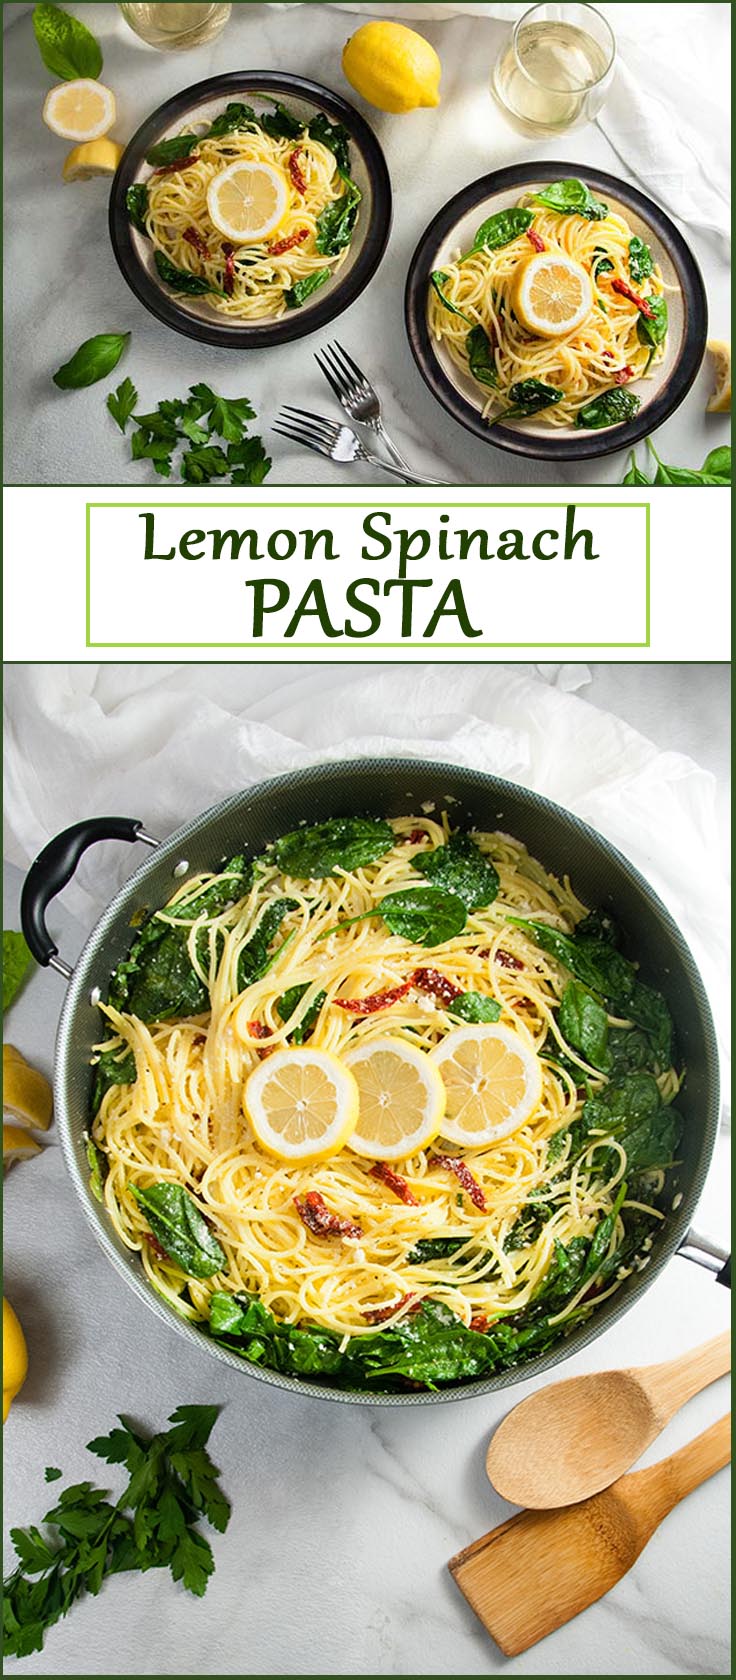 Easy Lemon Spinach Pasta with Sun Dried Tomatoes from www.SeasonedSprinkles.com